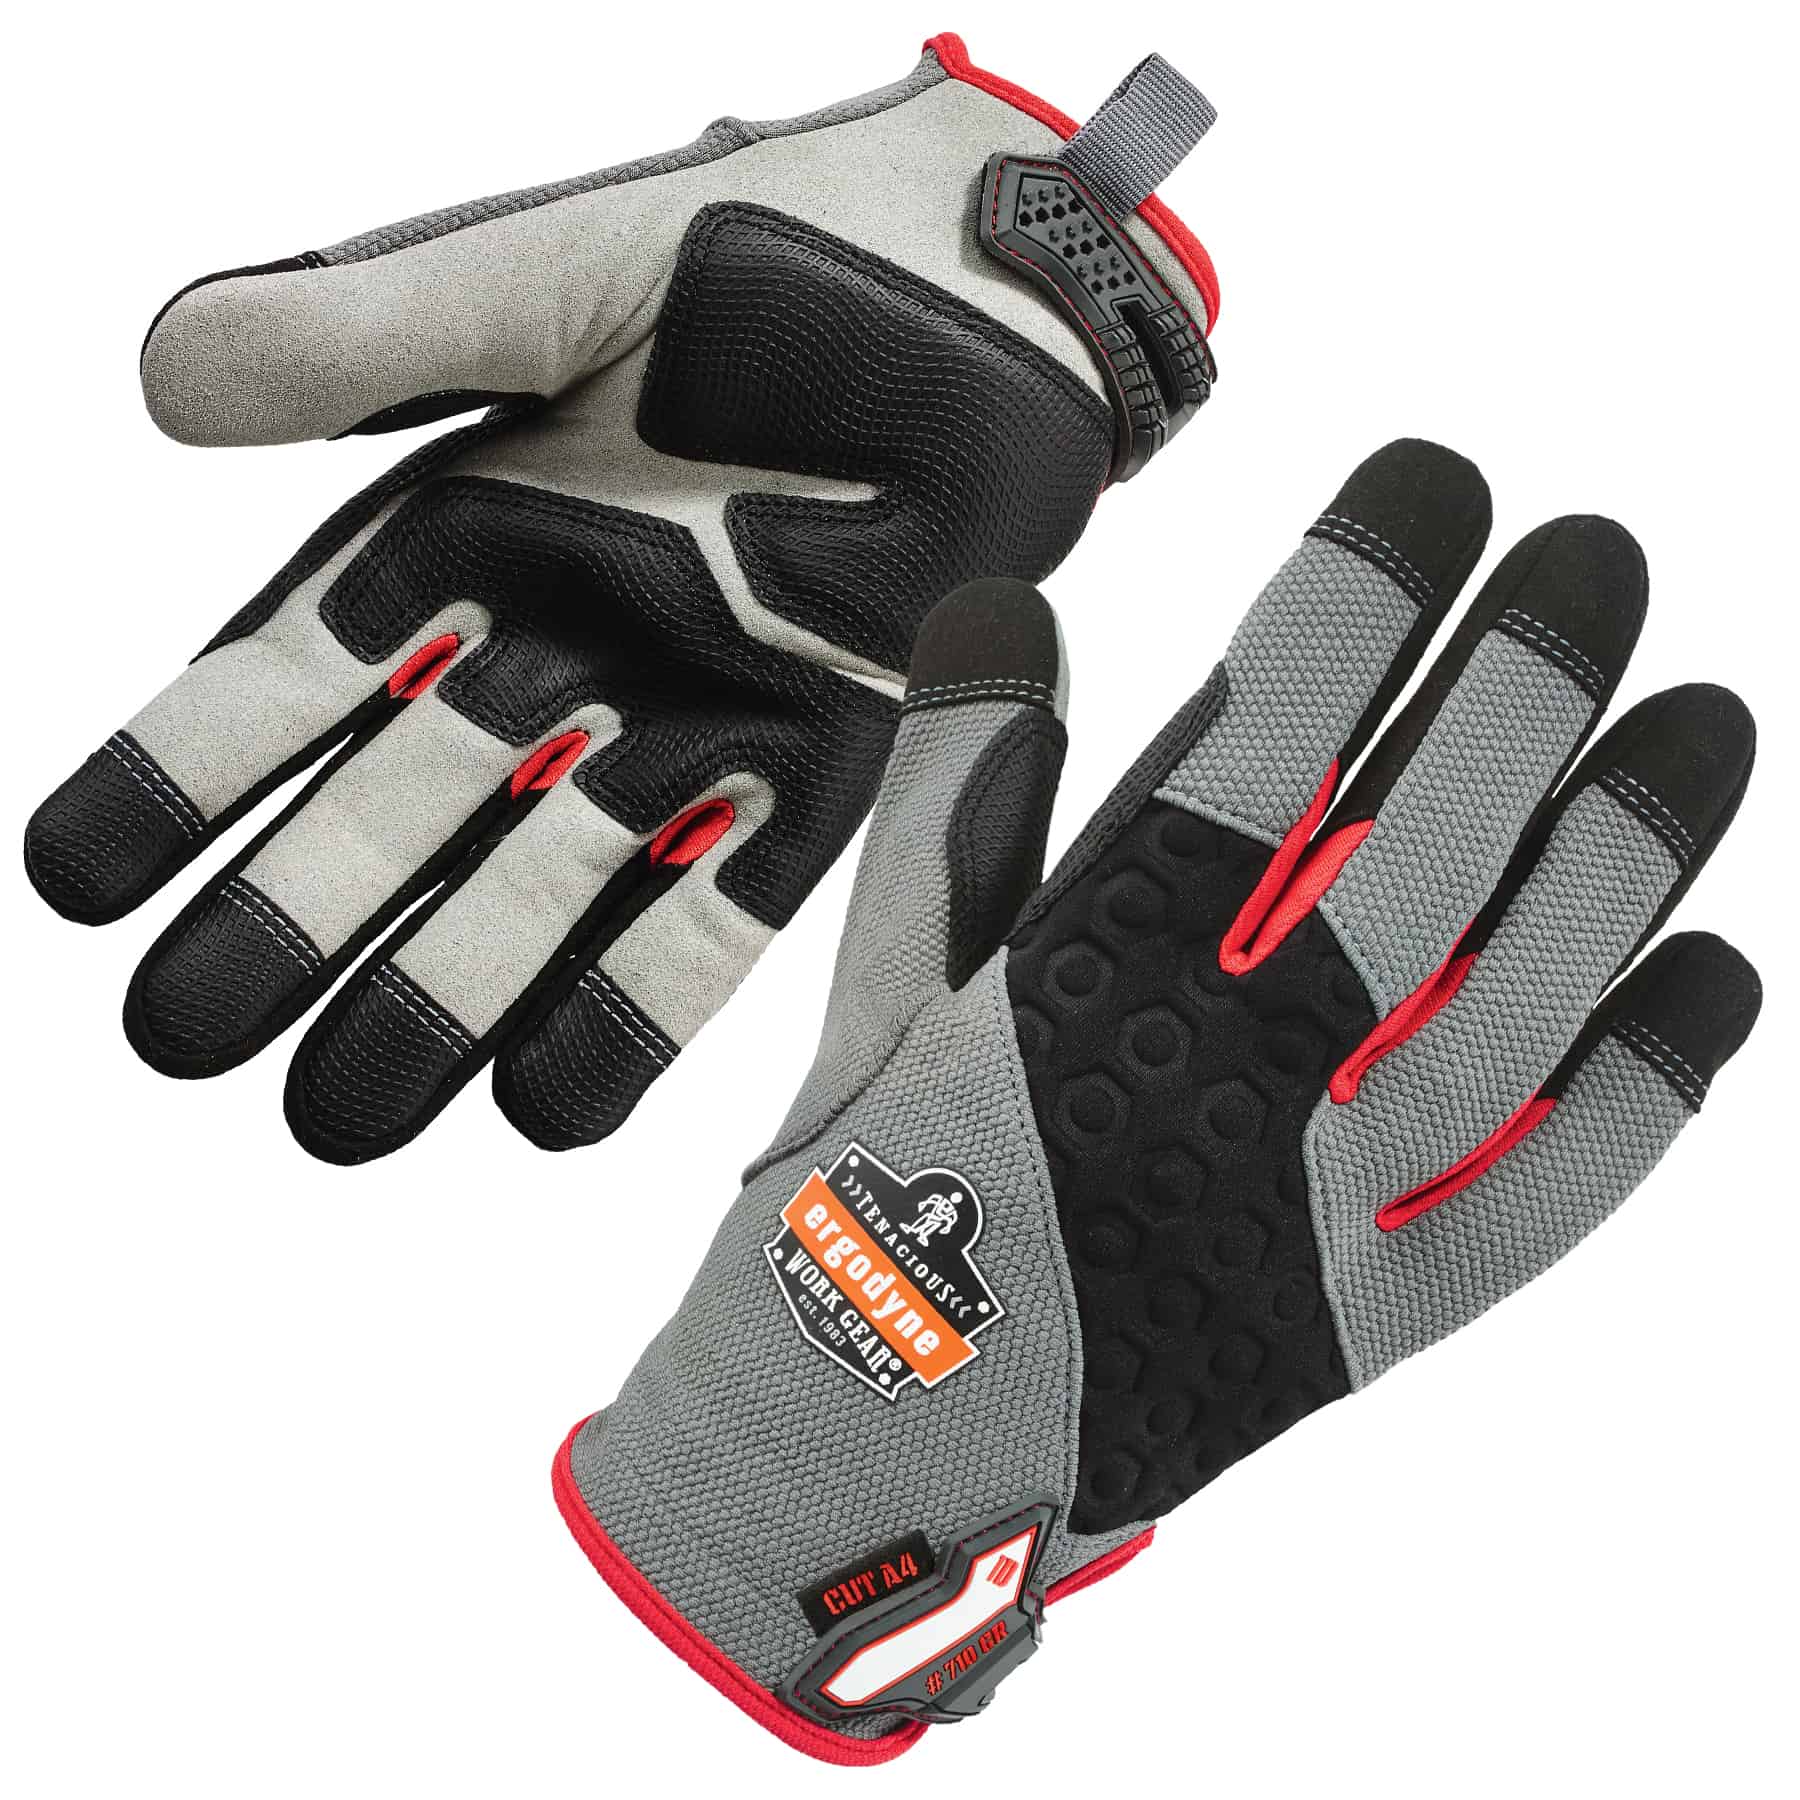 Smart Luxury Heavy-Duty + Cut Resistance Gloves, protective gloves for  cutting 